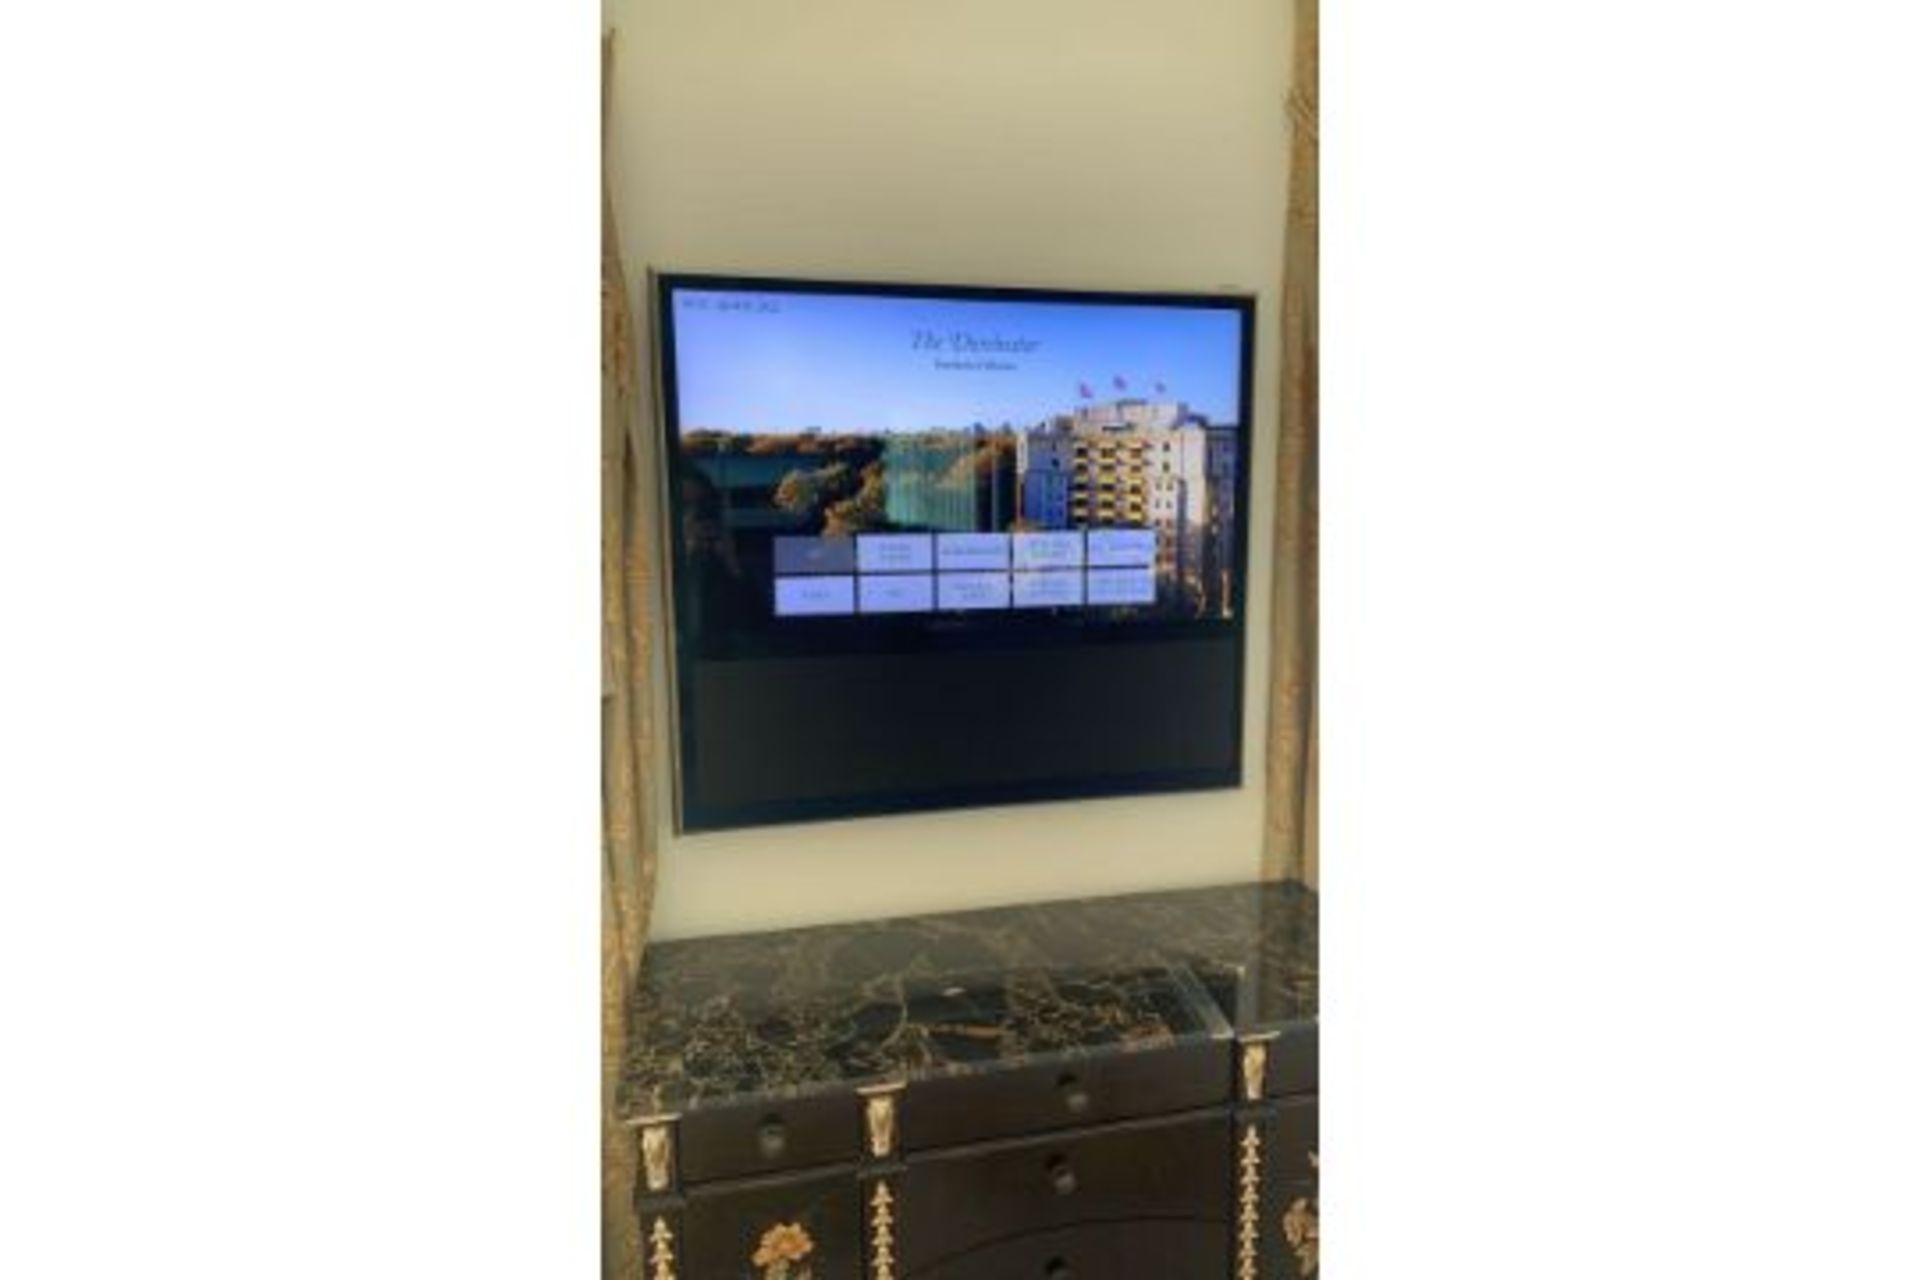 Bang Olufsen BeoVision 10-40" Hotel LCD TV Diagonal picture size: 40 inches (101.6cm) Aspect